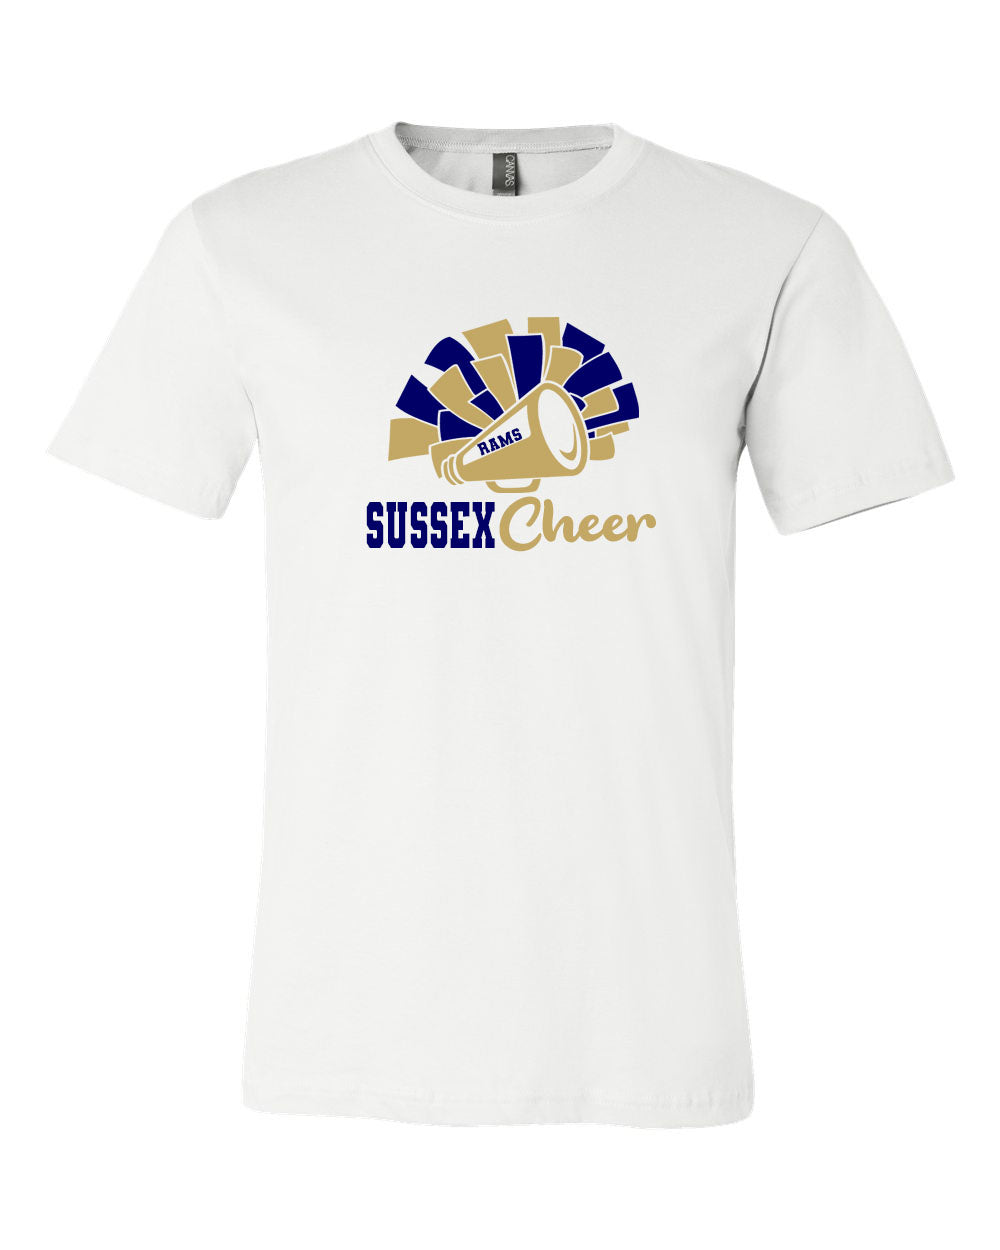 Sussex middle School Cheer design 2 T-Shirt